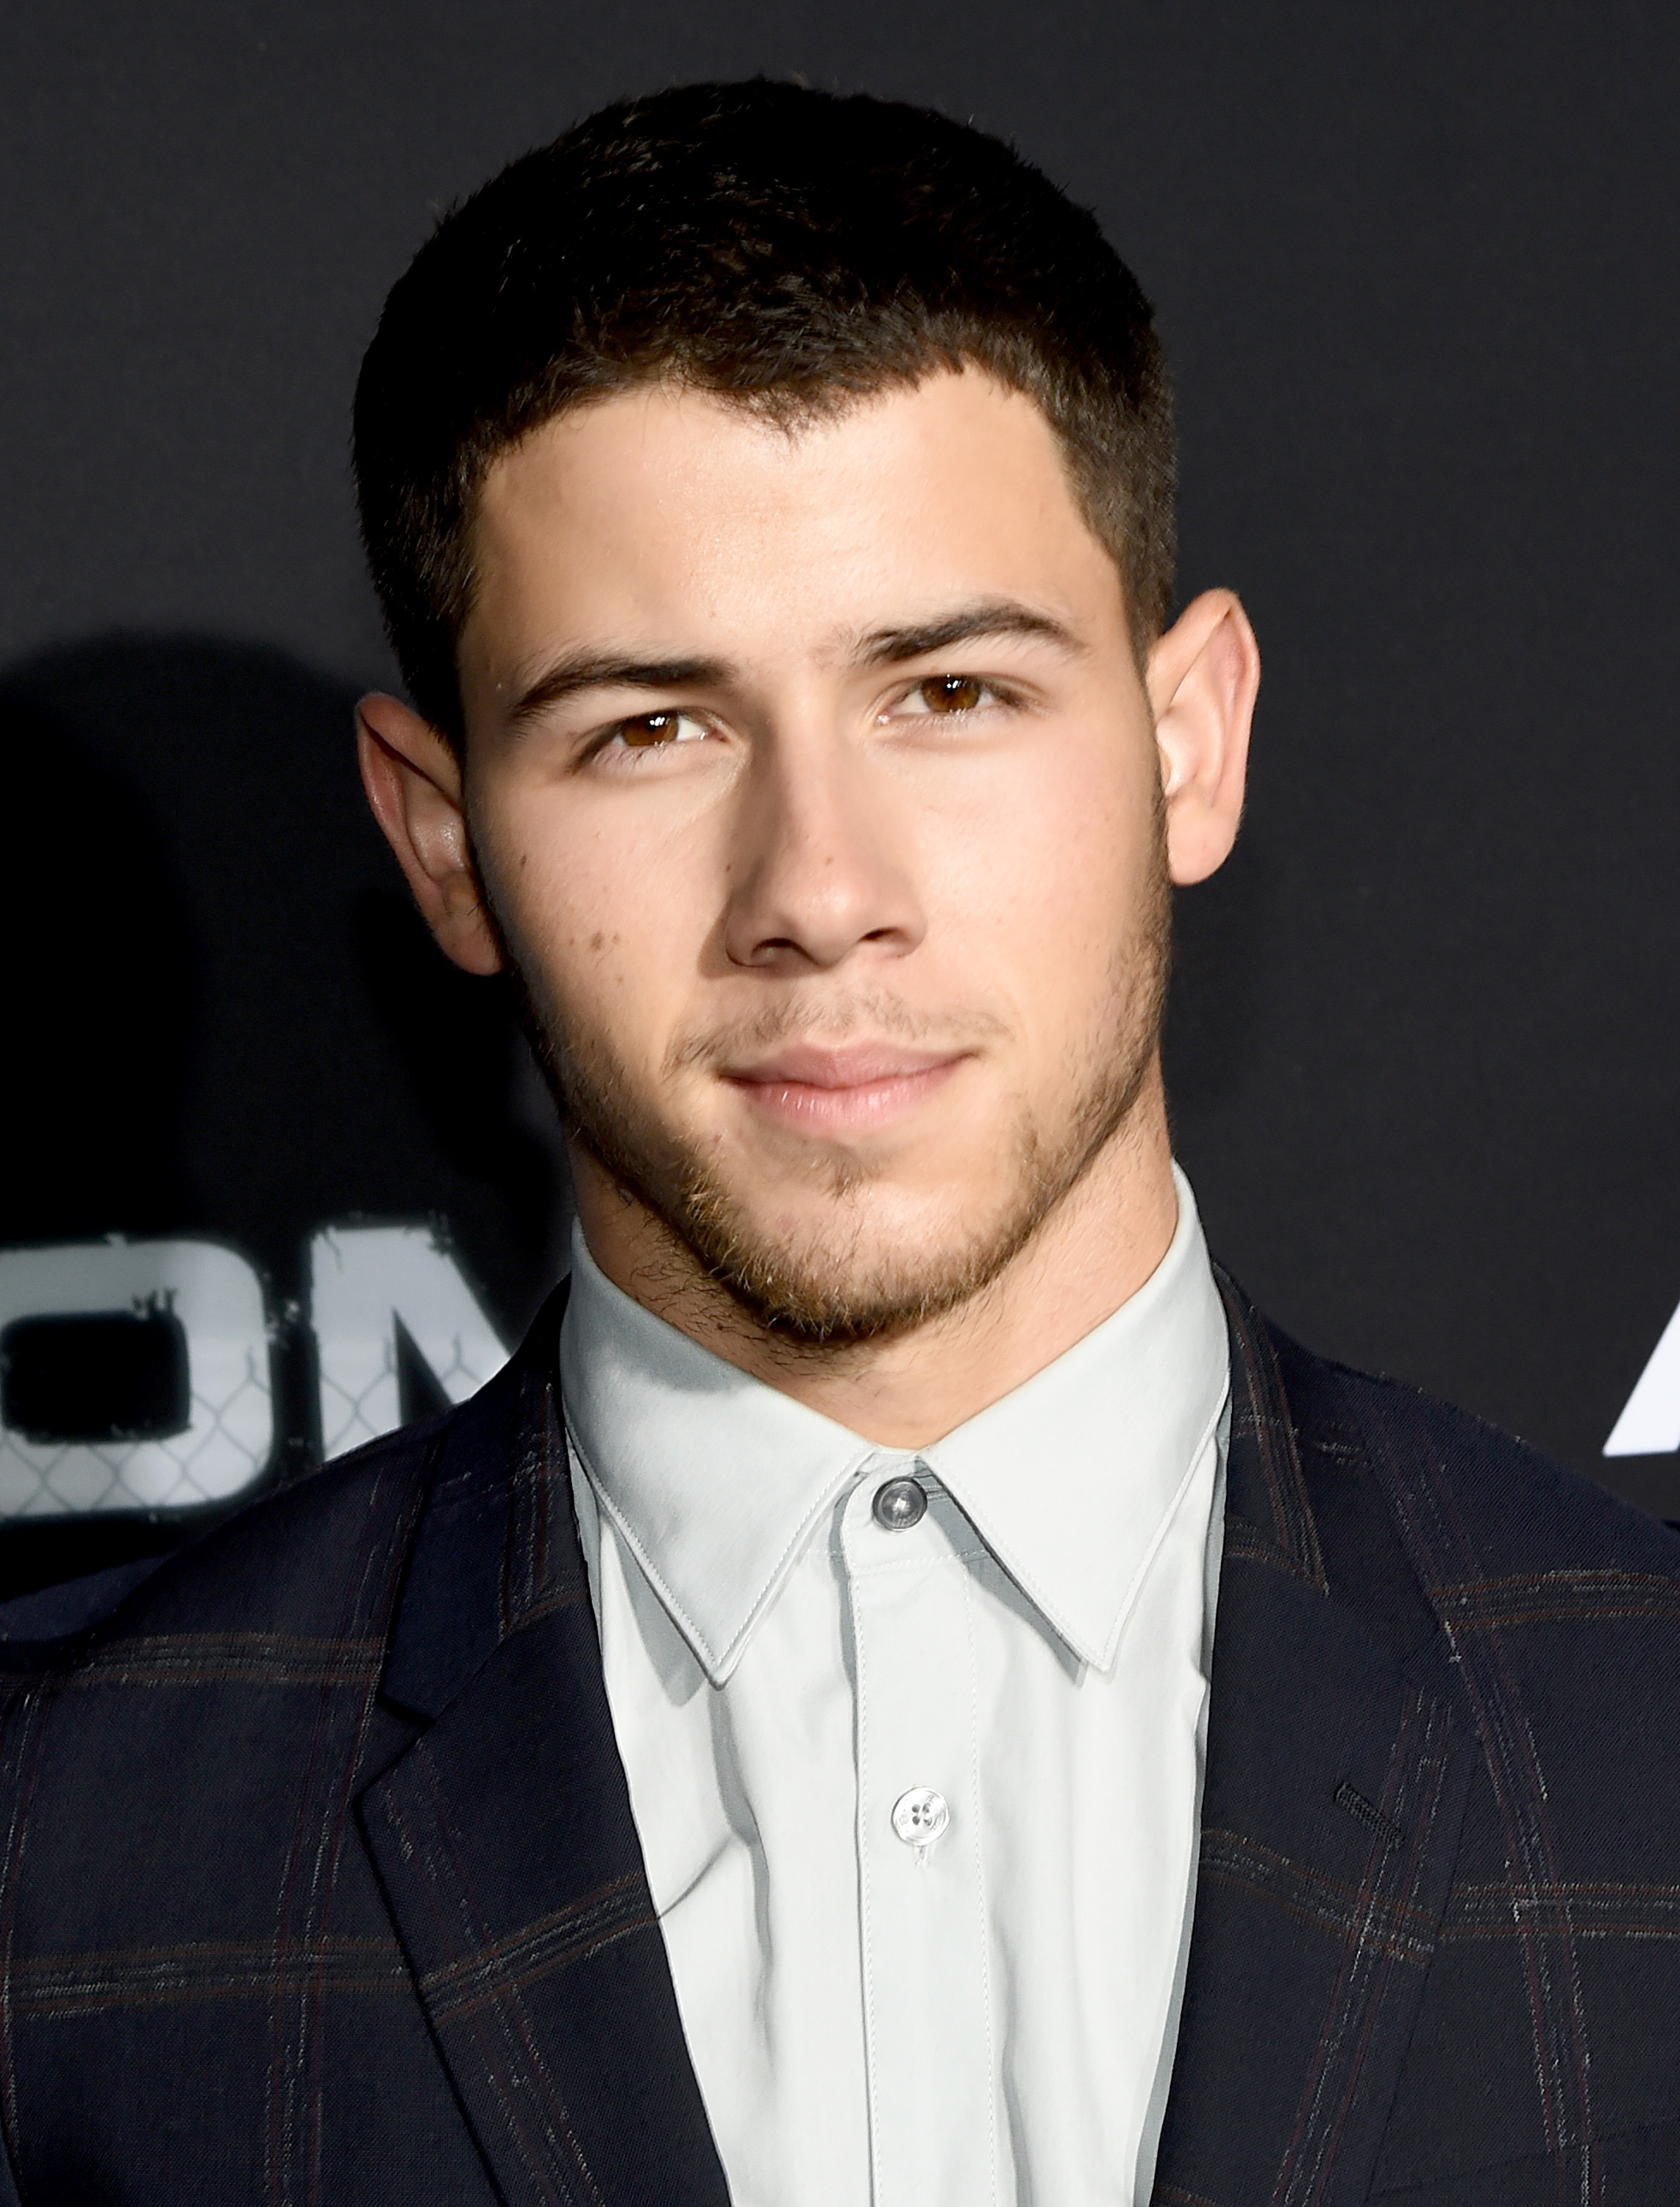 Nick Jonas' Shirtless Photo Shoot Is Eliciting Some Pretty Intense ...